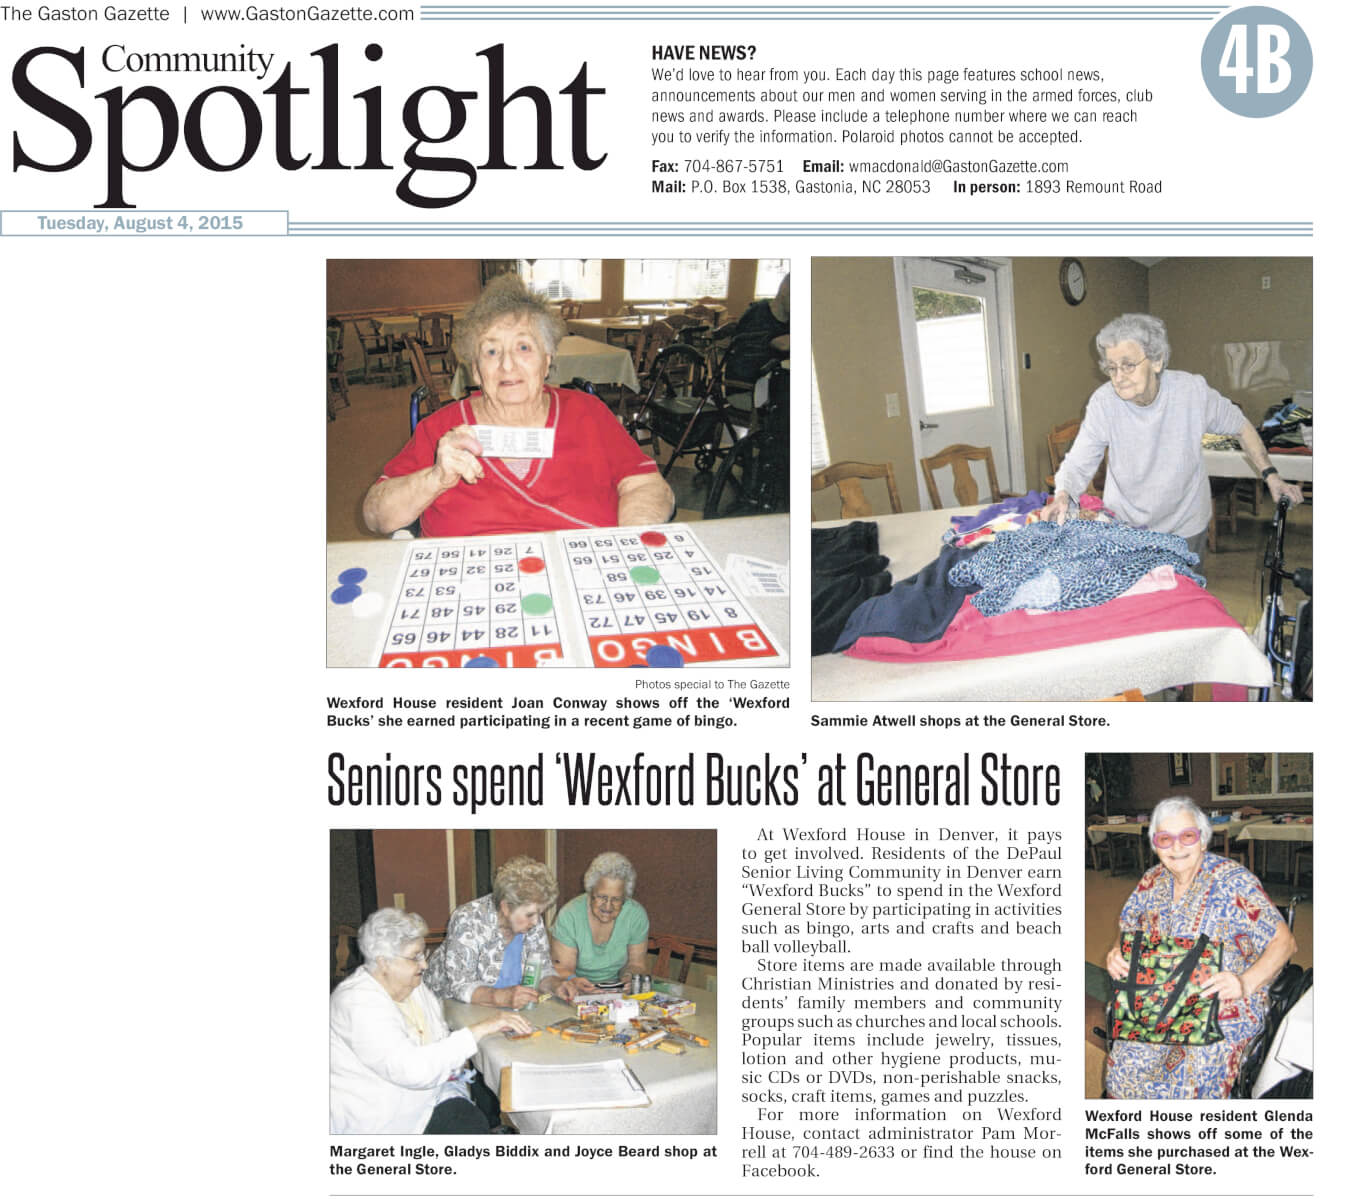 Seniors spend Wexford bucks at the general store, story in the The Gaston Gazette August 4, 2015